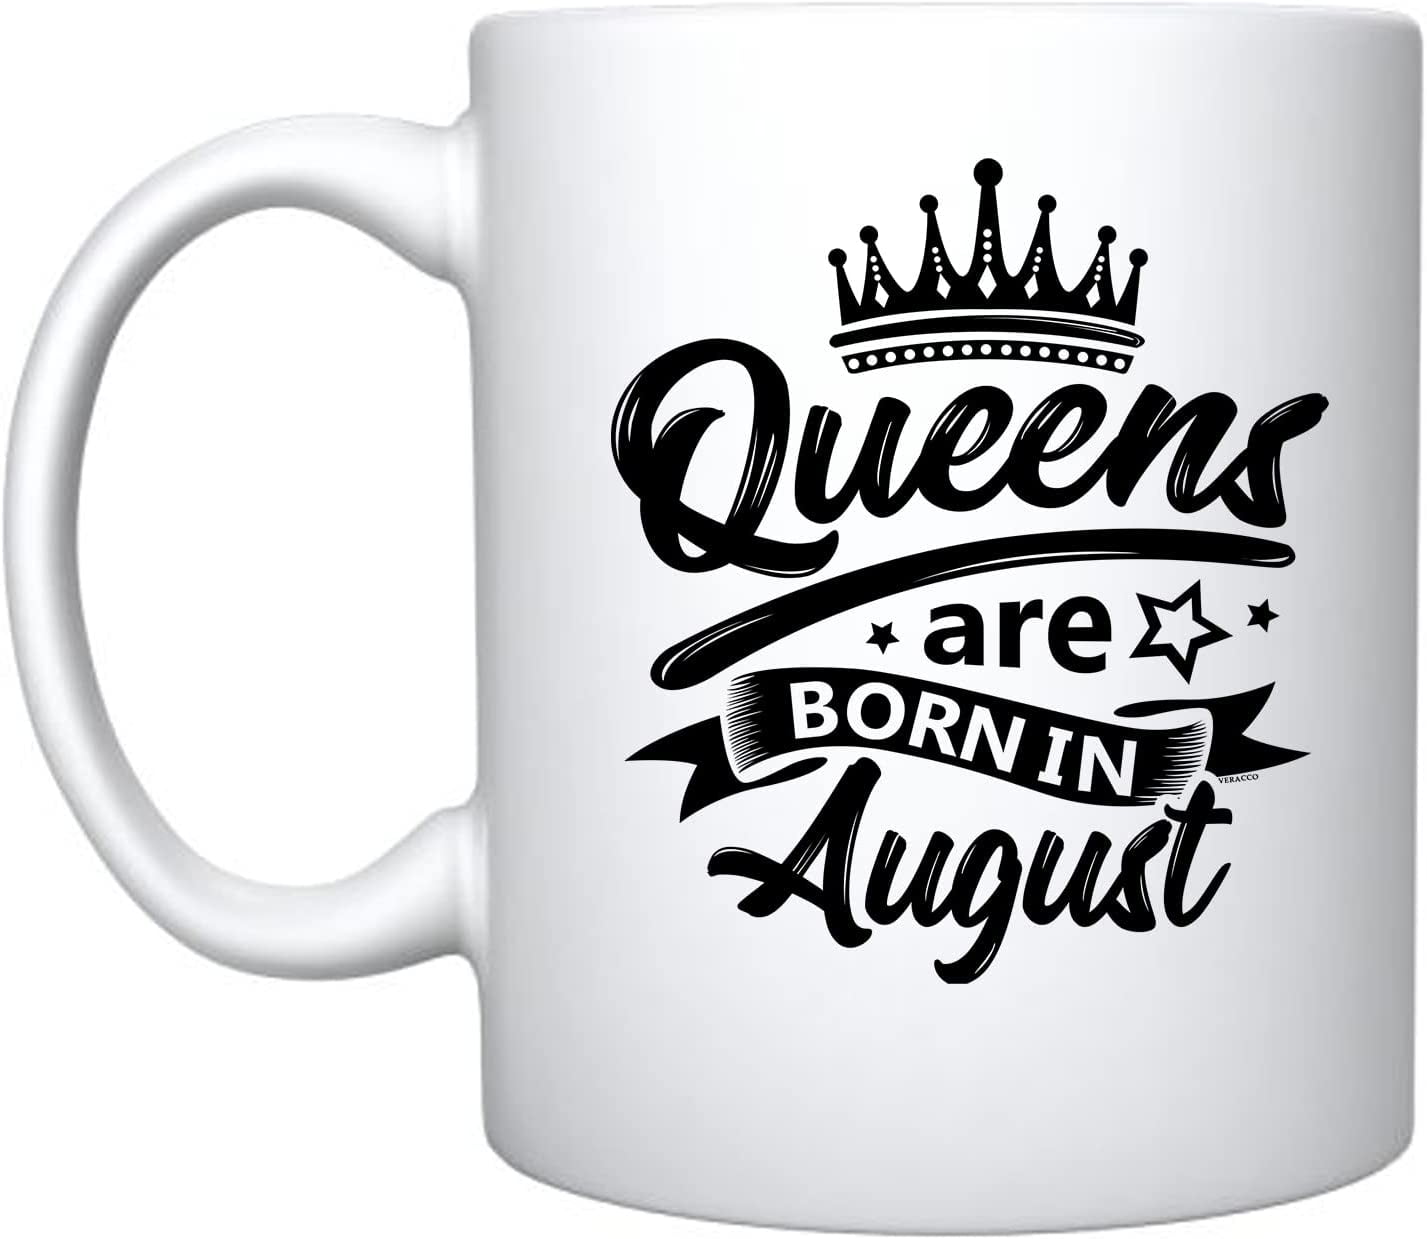 11 Unique gifts for your coffee lover – Coffee with the Queen